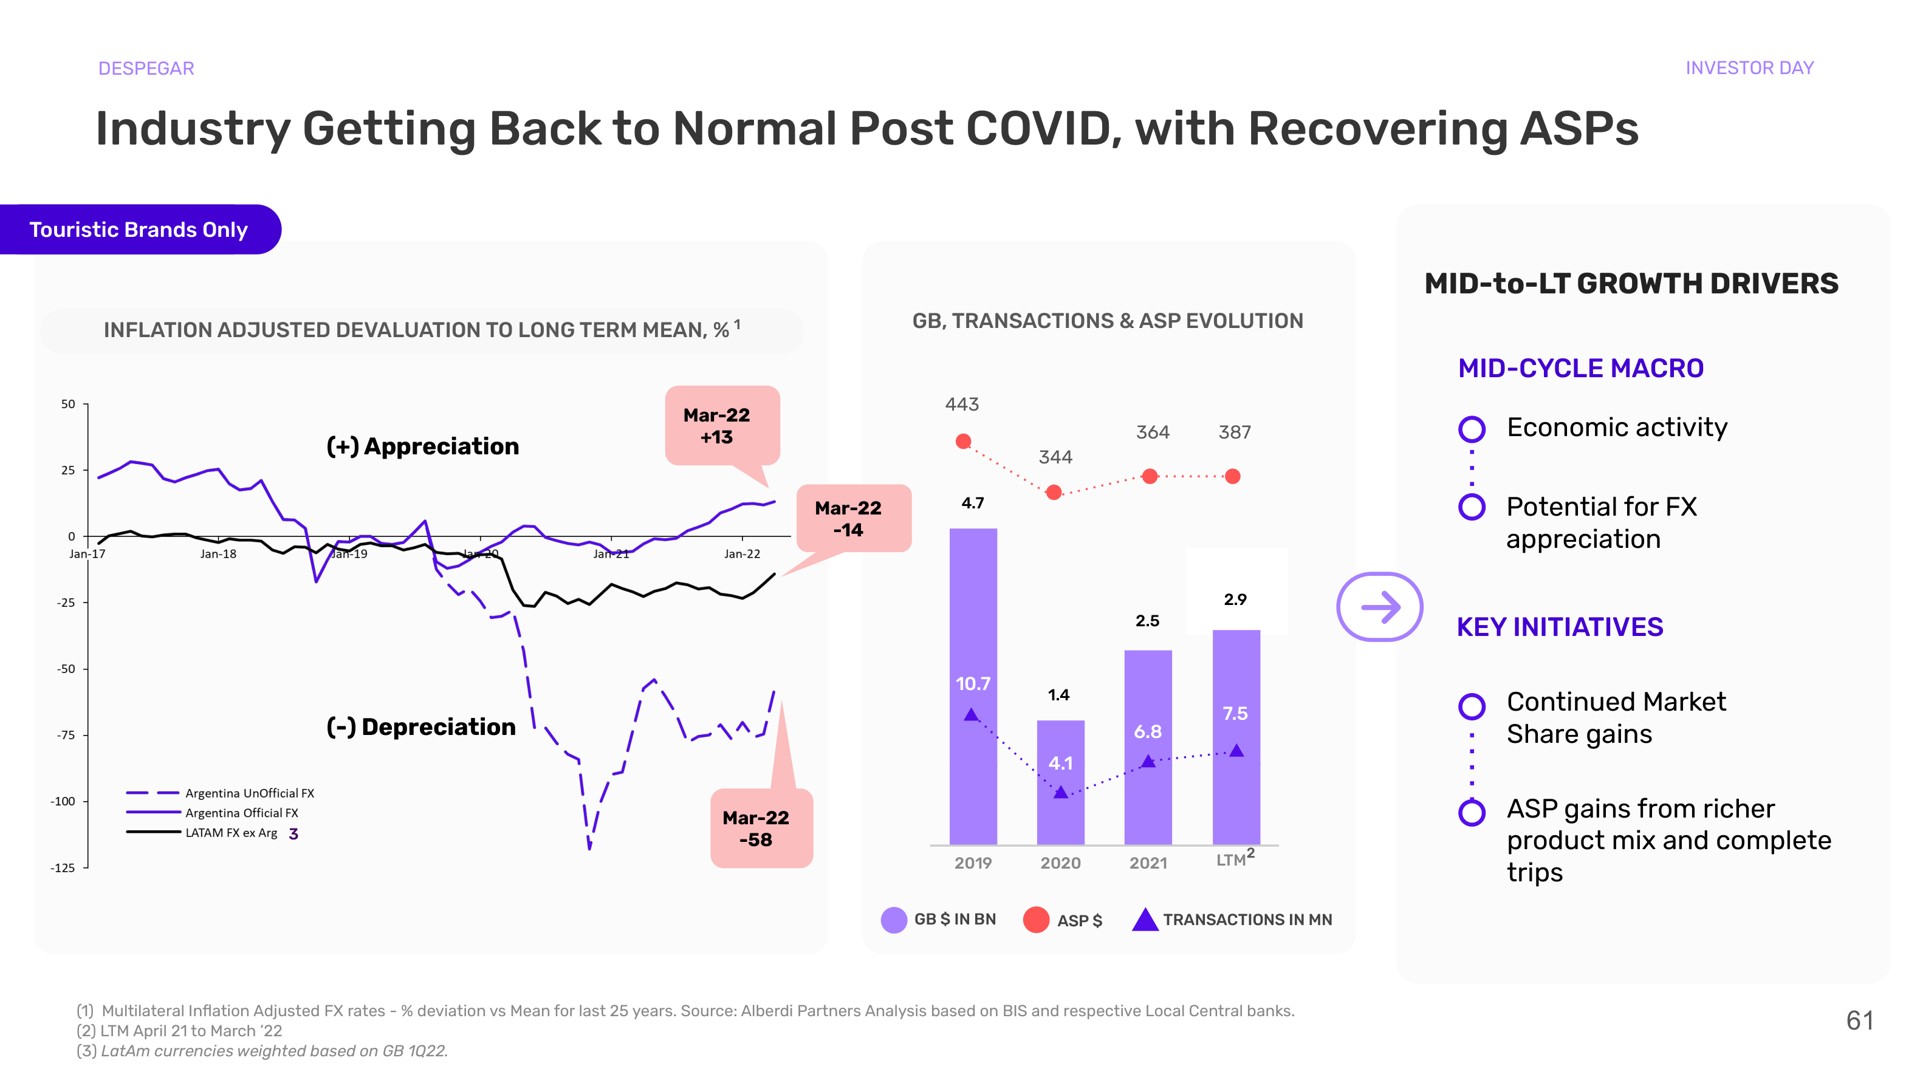 industry getting back to normal post covid with recovering asps mid to growth drivers mid cycle macro economic activity potential for appreciation key initiatives continued market share gains asp gains from product mix and complete trips | Despegar